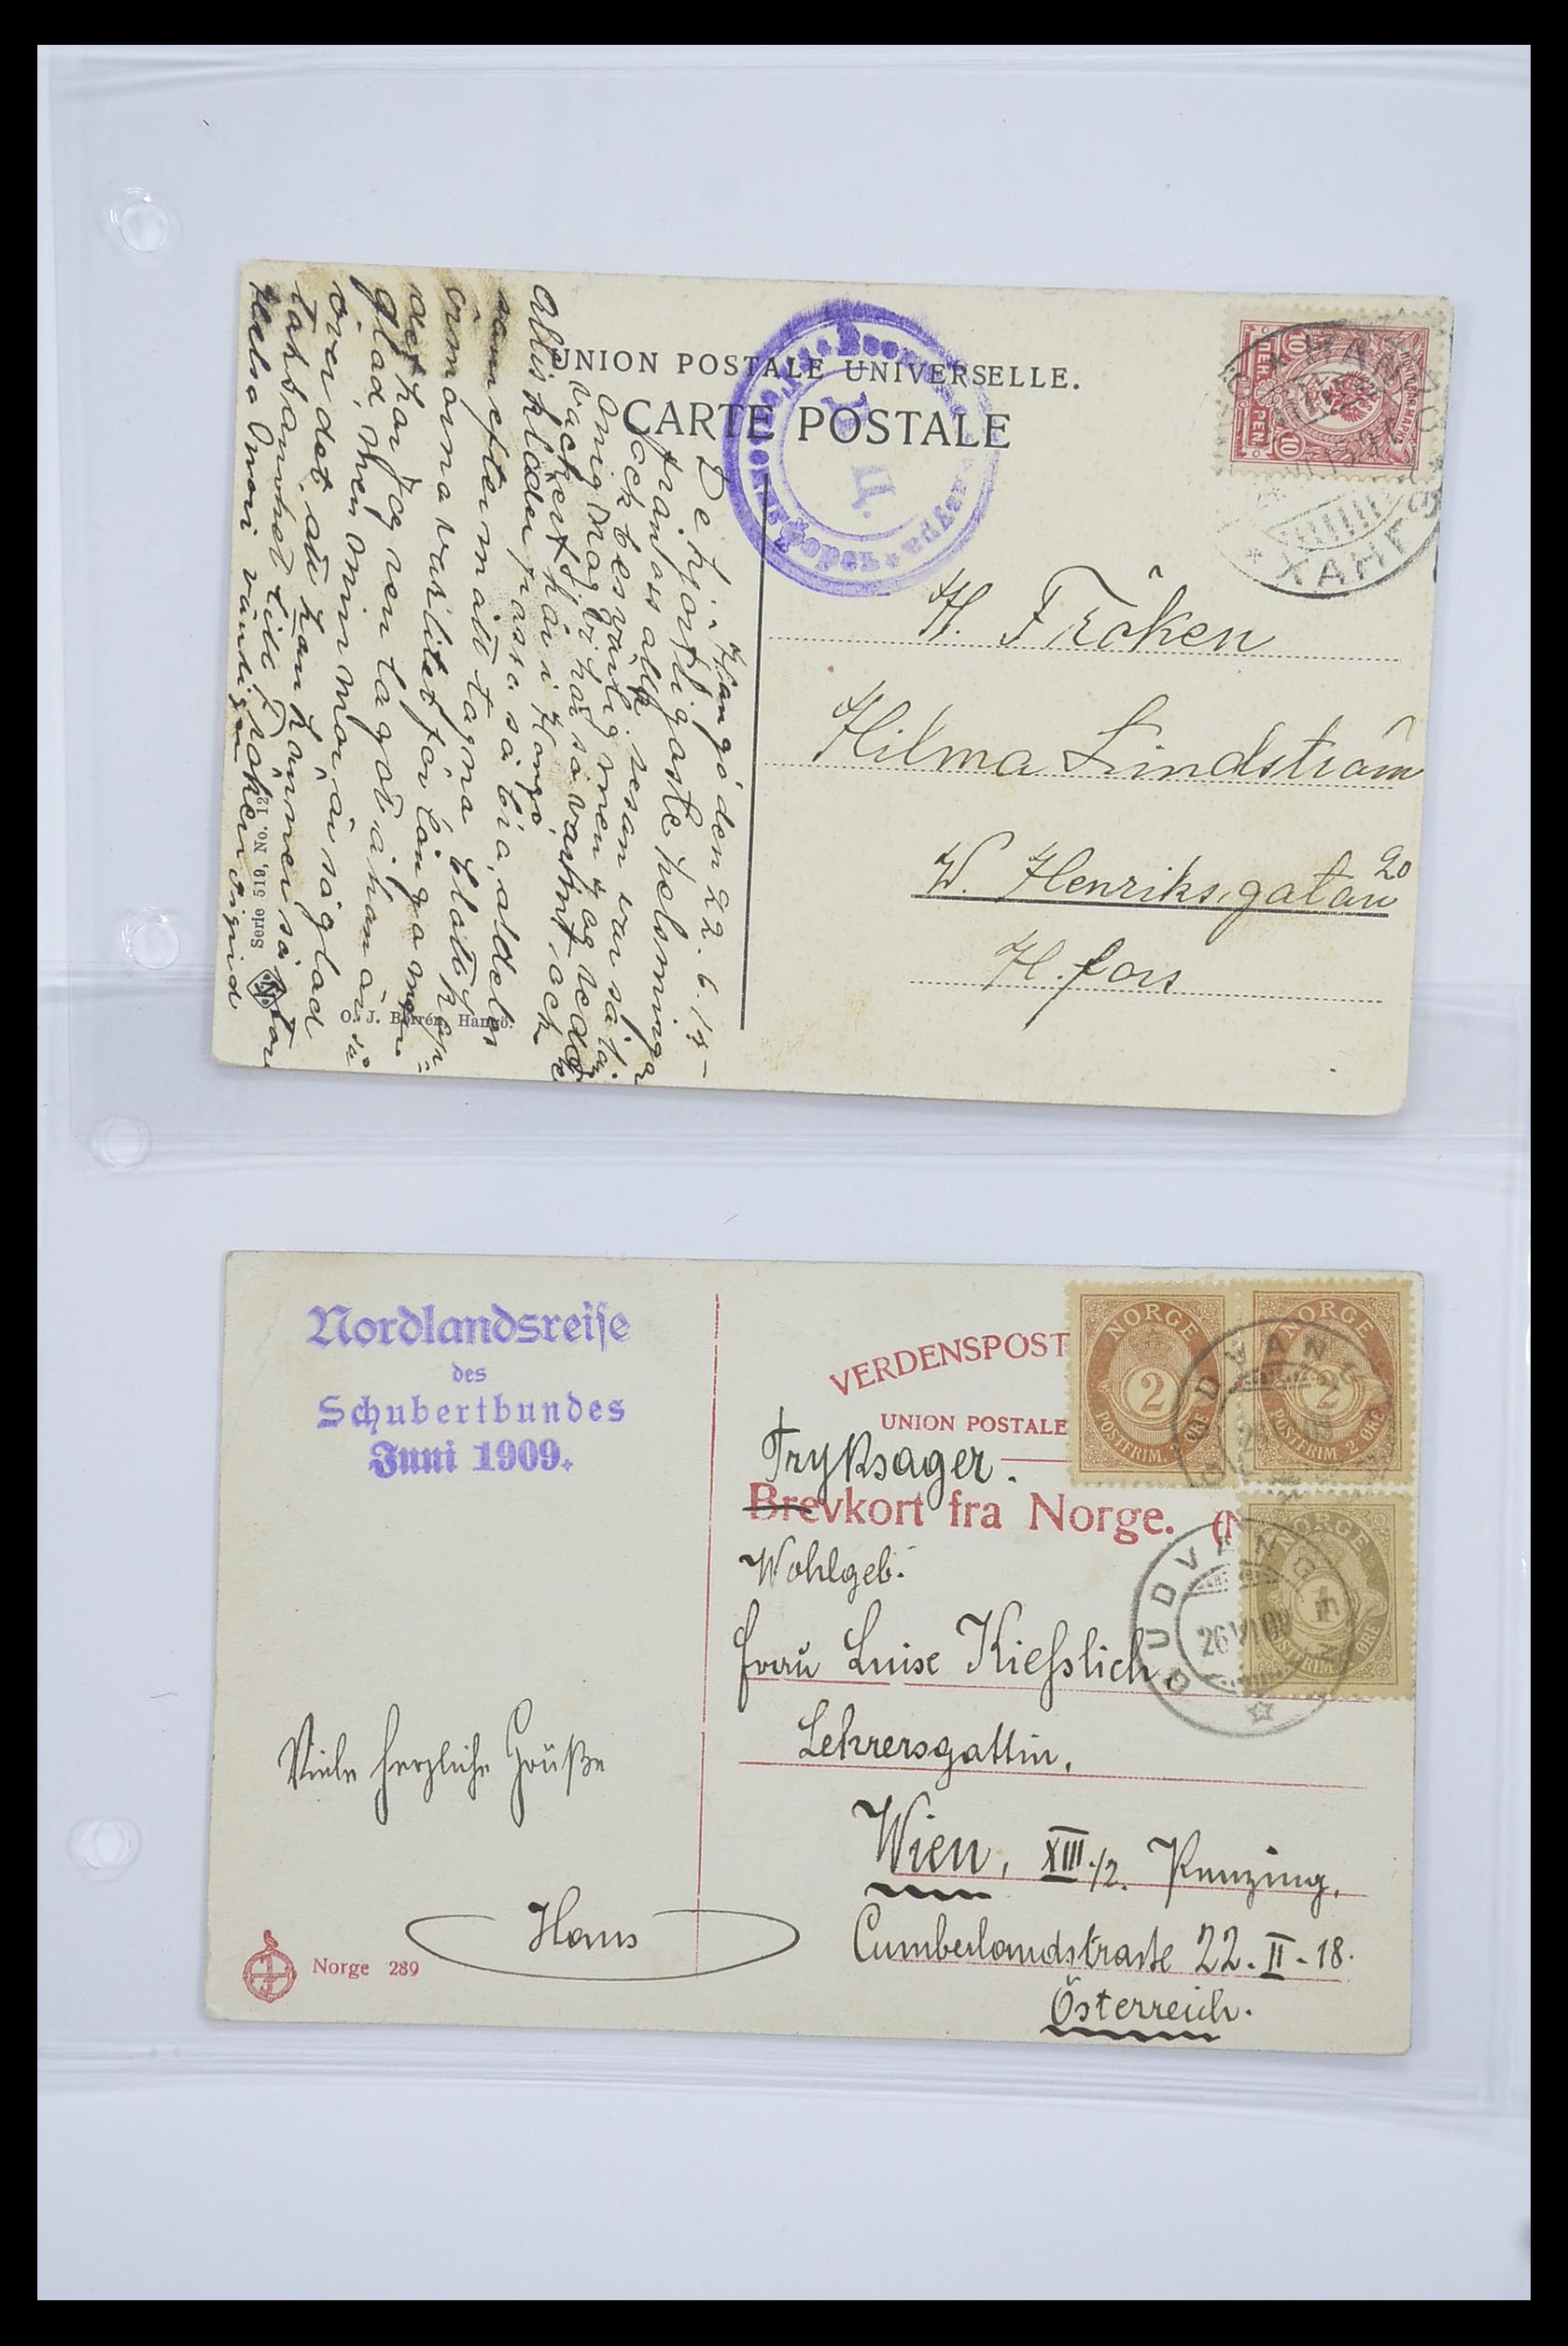 33241 047 - Stamp collection 33241 Scandinavia covers 1860-1930.